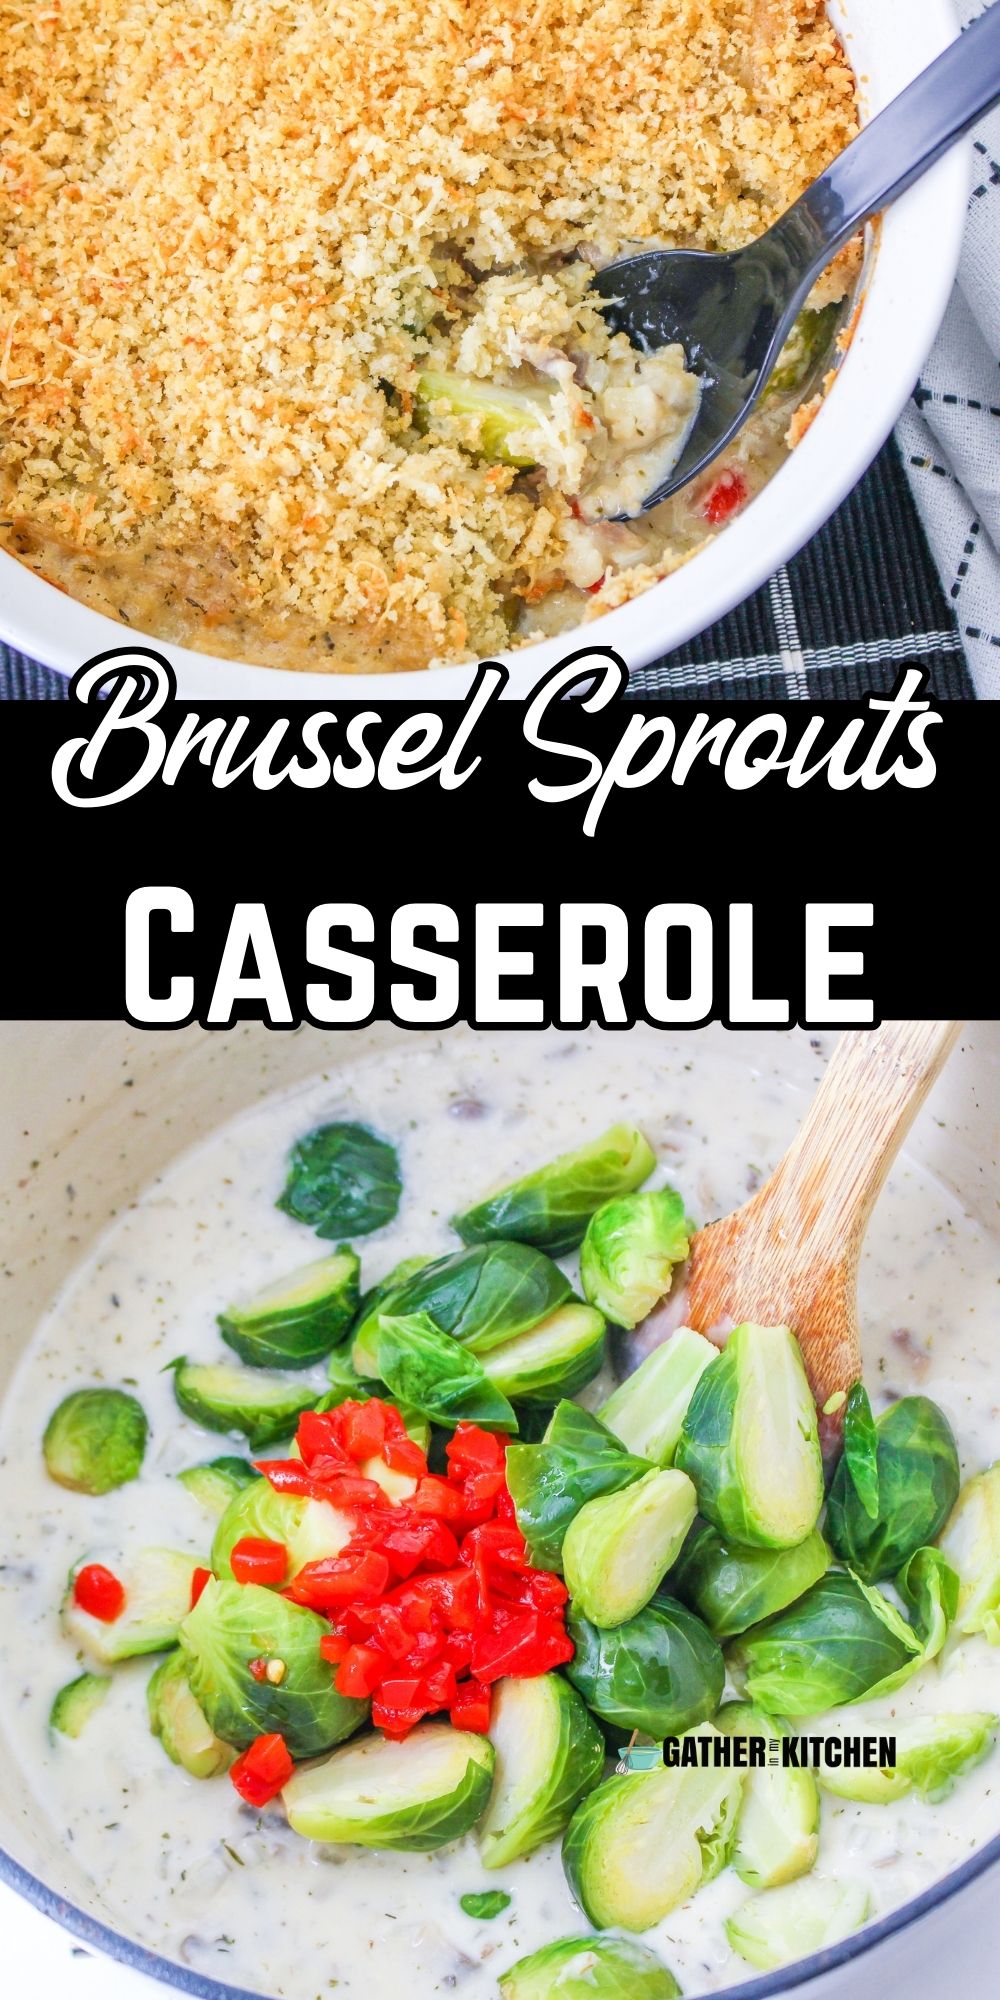 Pin image: top is a brussels sprouts casserole with a spoon in it, middle says "Brussel Sprouts casserole" and bottom is brussels sprouts and veggies in a pot.